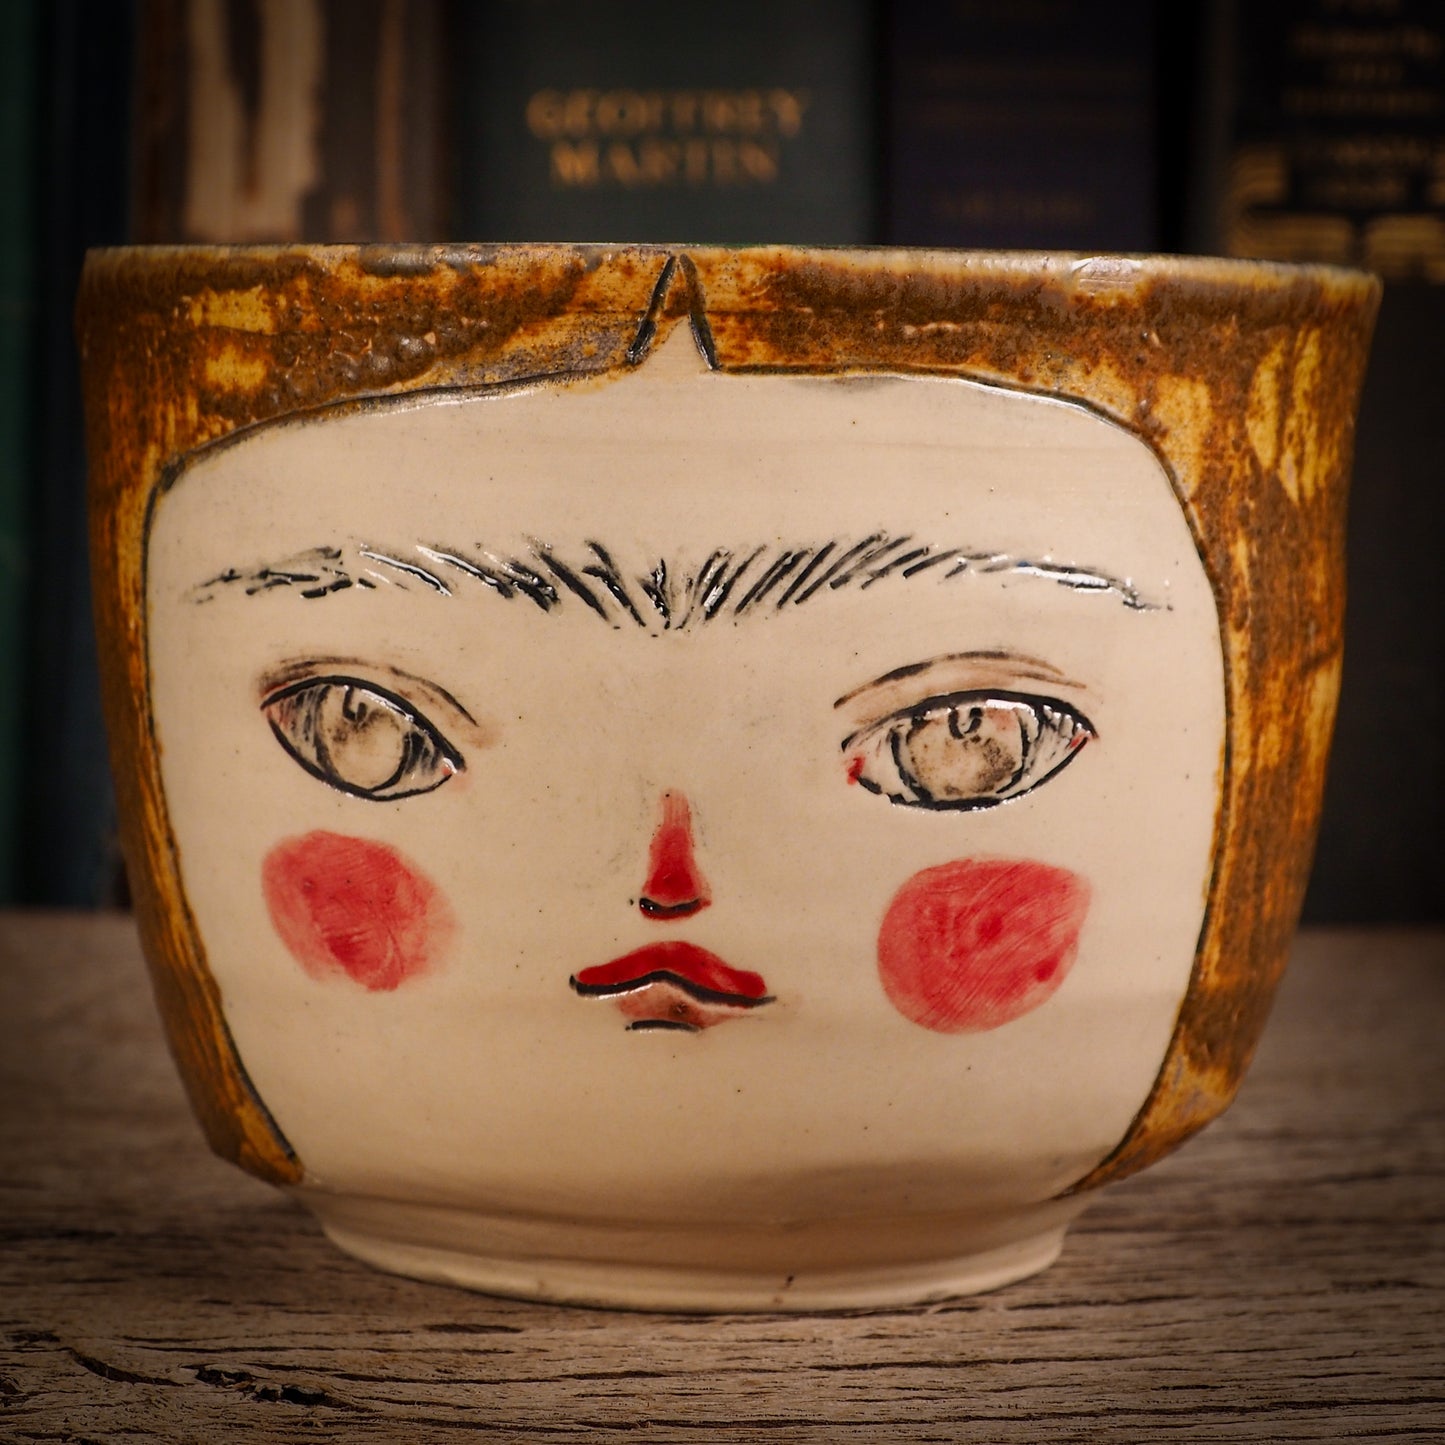  this is an original handmade glazed stoneware ceramic bowl by Idania Salcido the artist behind Danita Art, with Frida Kahlo hand sculpted on it, this is a unique and original home decoration one of a kind kitchenware piece.